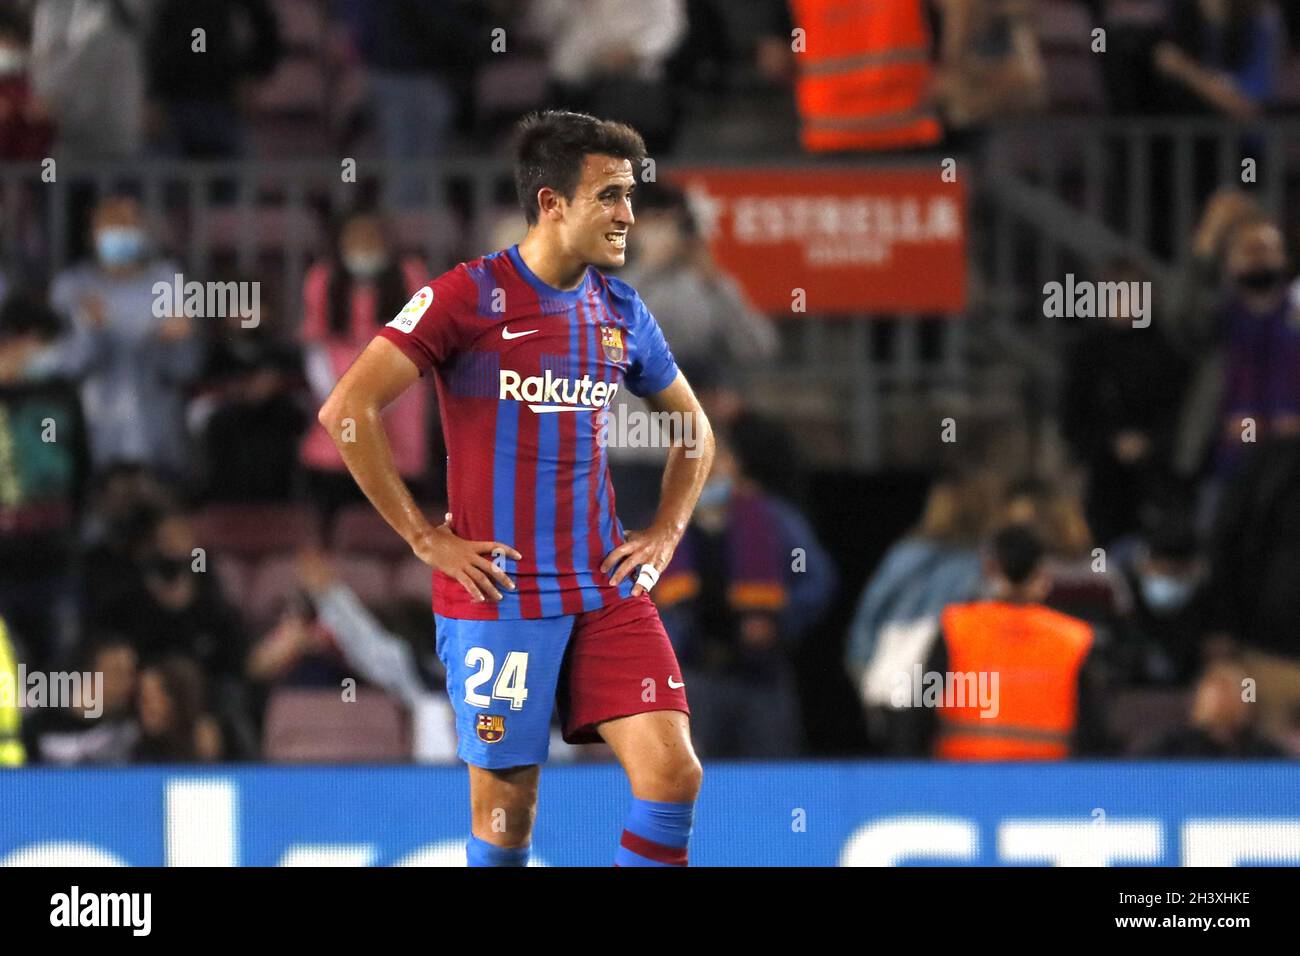 Barcelona, Spain. 30th Oct, 2021. Barcelona, Spain, October 30th 2021: Eric Garcia (24 FC Barcelona) disappointed after the match during, LaLiga Santander match between Barcelona and Alaves at Camp Nou stadium in Barcelona, Spain. Rafa Huerta/SPP Credit: SPP Sport Press Photo. /Alamy Live News Stock Photo